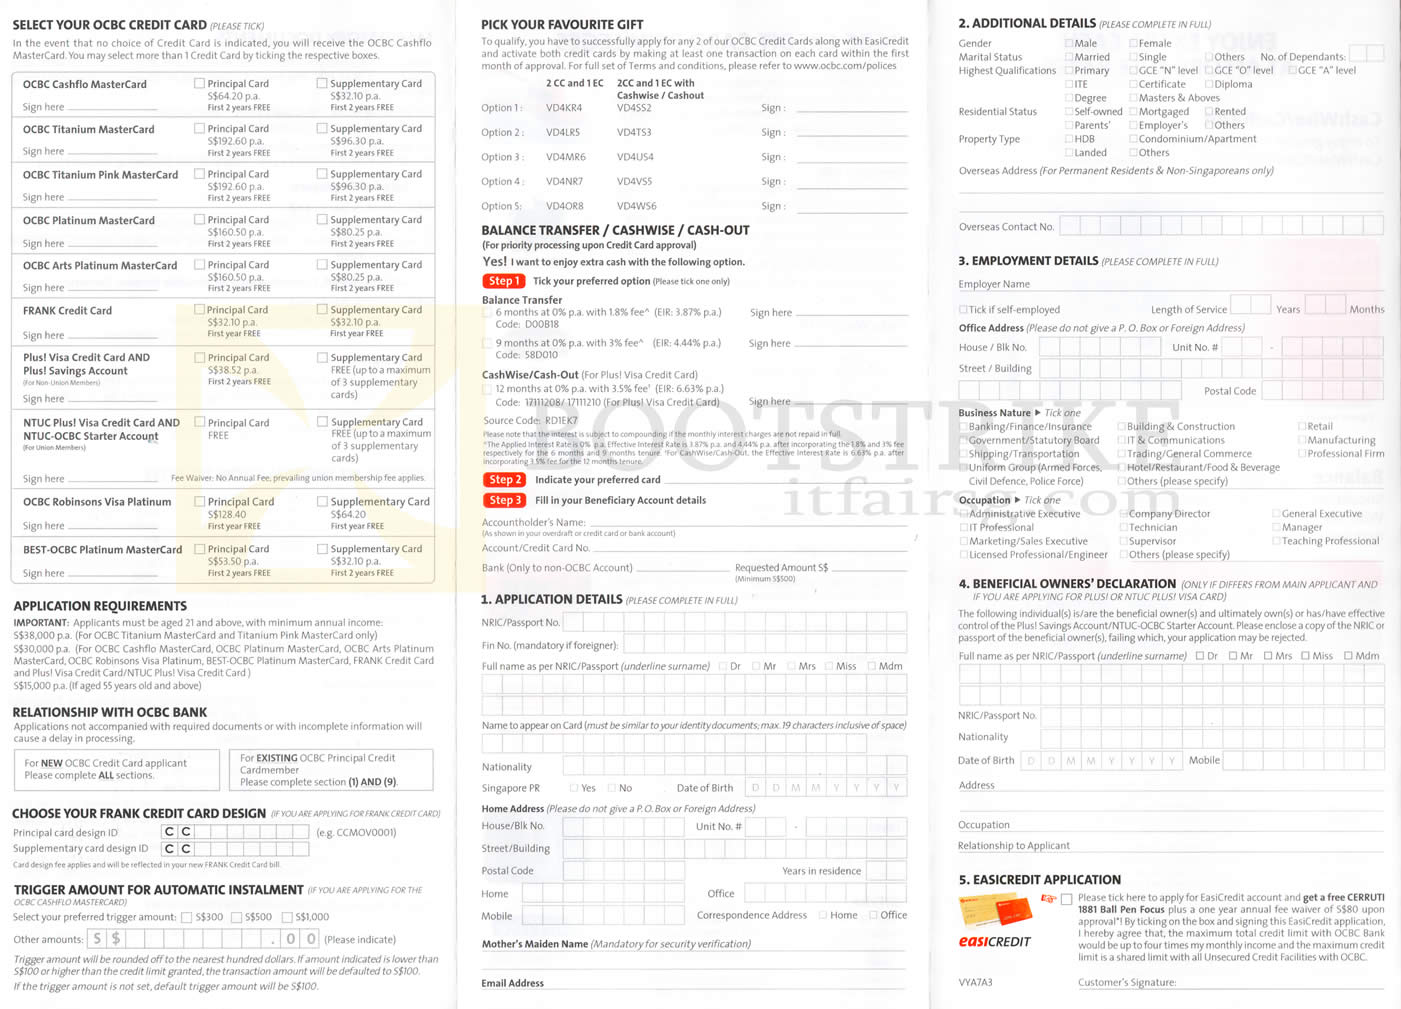 SITEX 2012 price list image brochure of OCBC Credit Cards Annual Fees, Application Requirements, Form